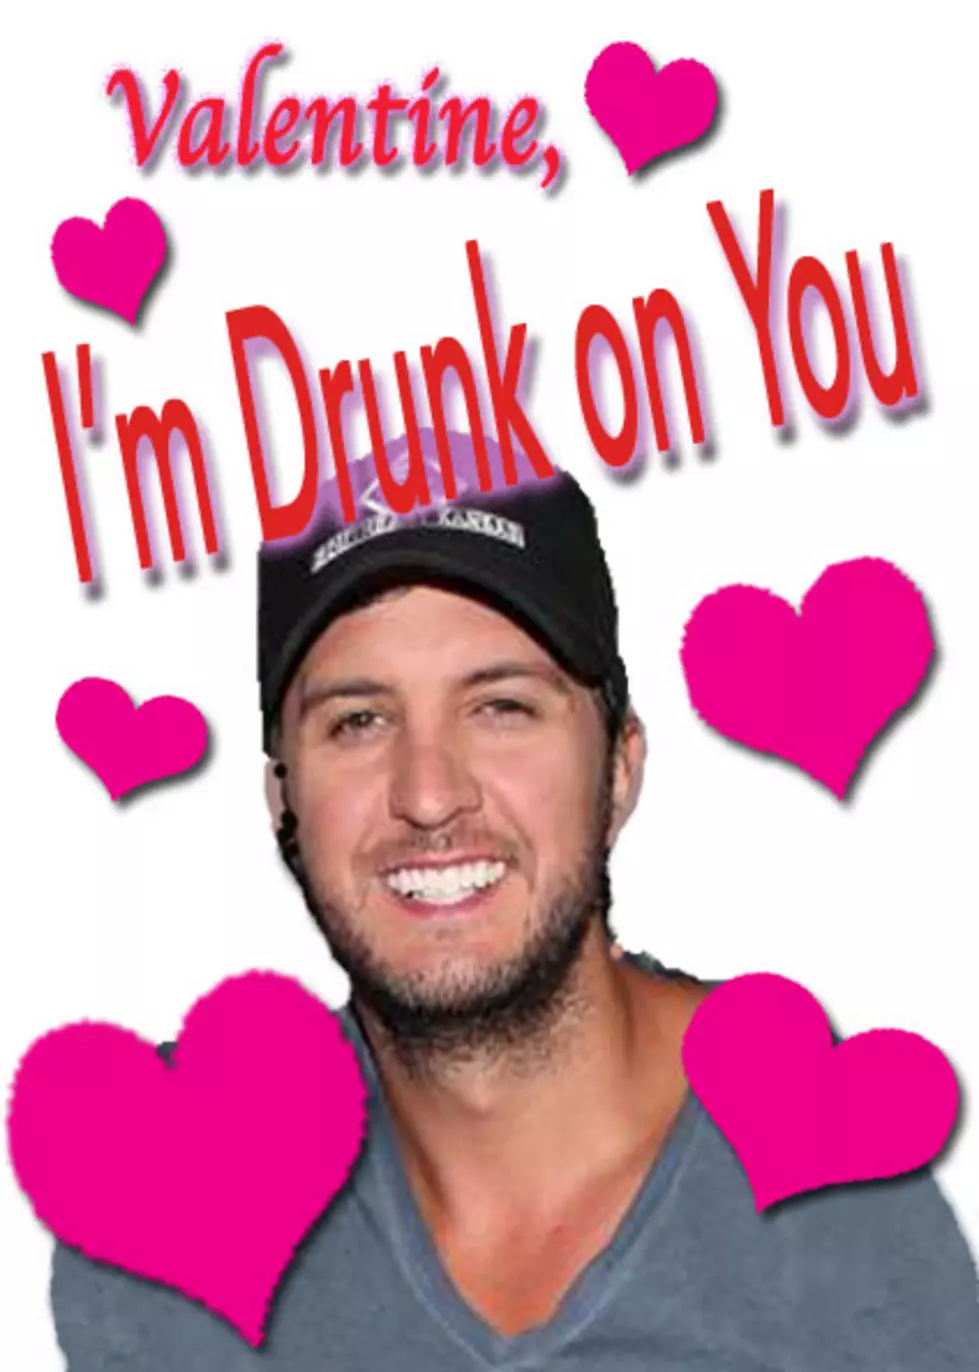 Check Out Luke Bryan’s Valentine’s Day Card